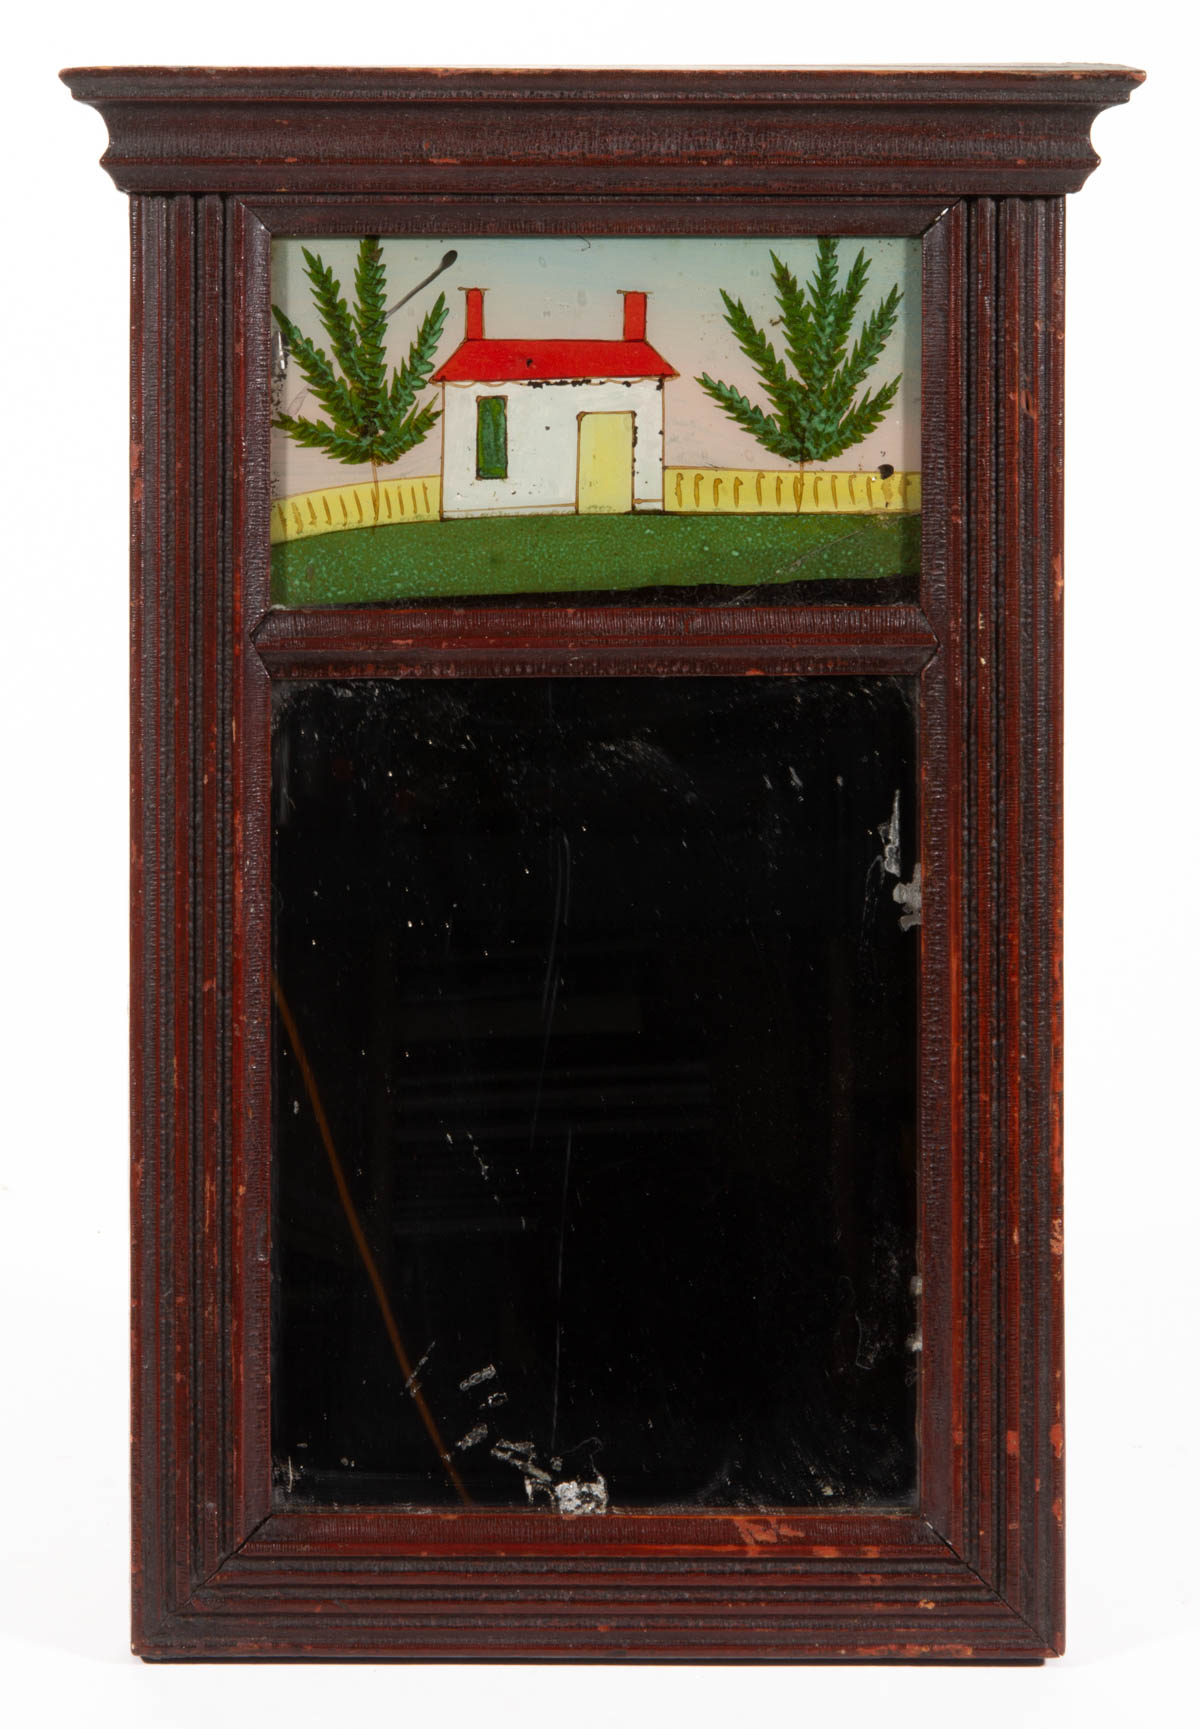 AMERICAN LATE FEDERAL PAINTED WALL MIRROR / LOOKING GLASS